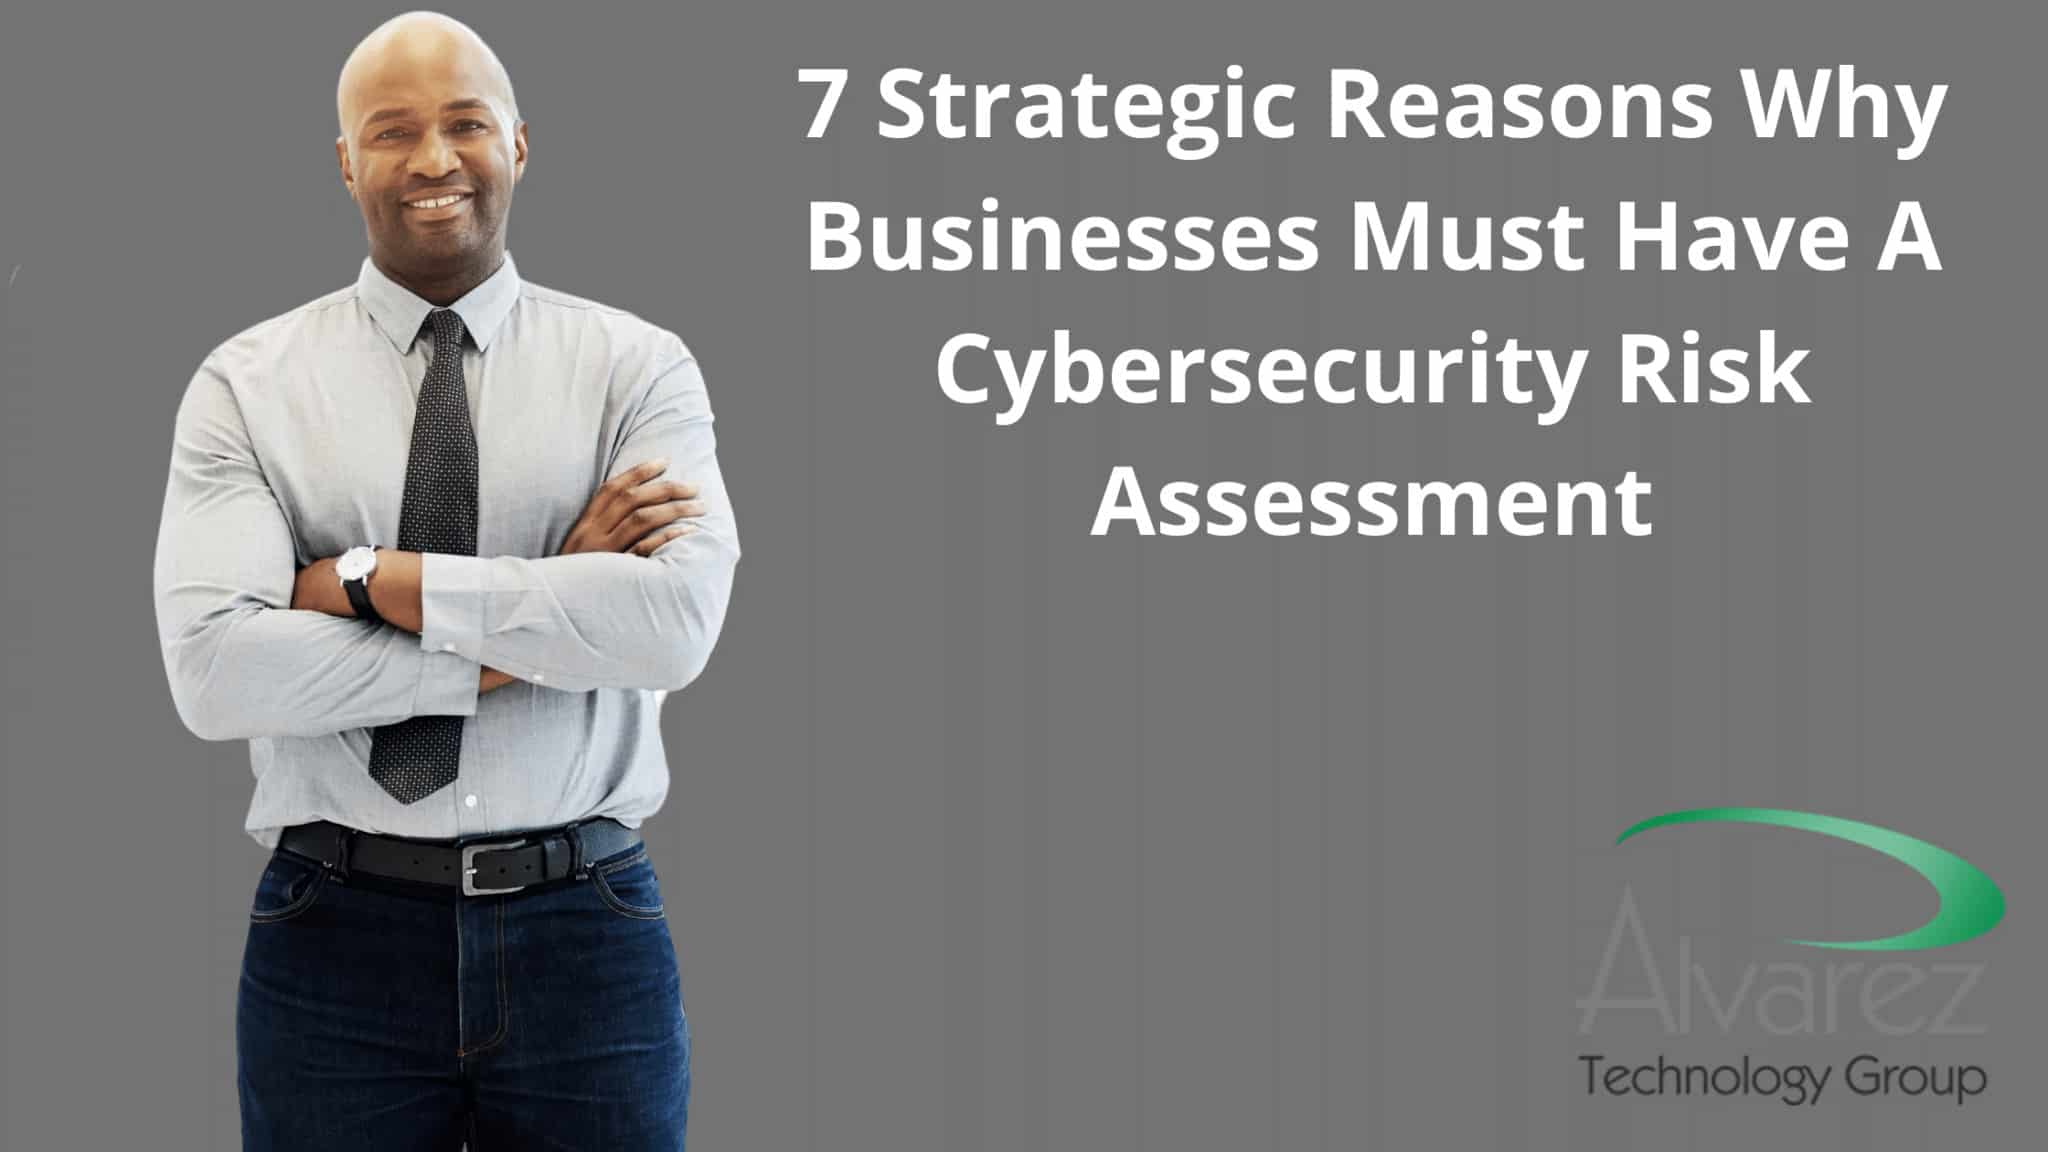 7 Strategic Reasons Why Businesses Must Have A Cybersecurity Risk Assessment